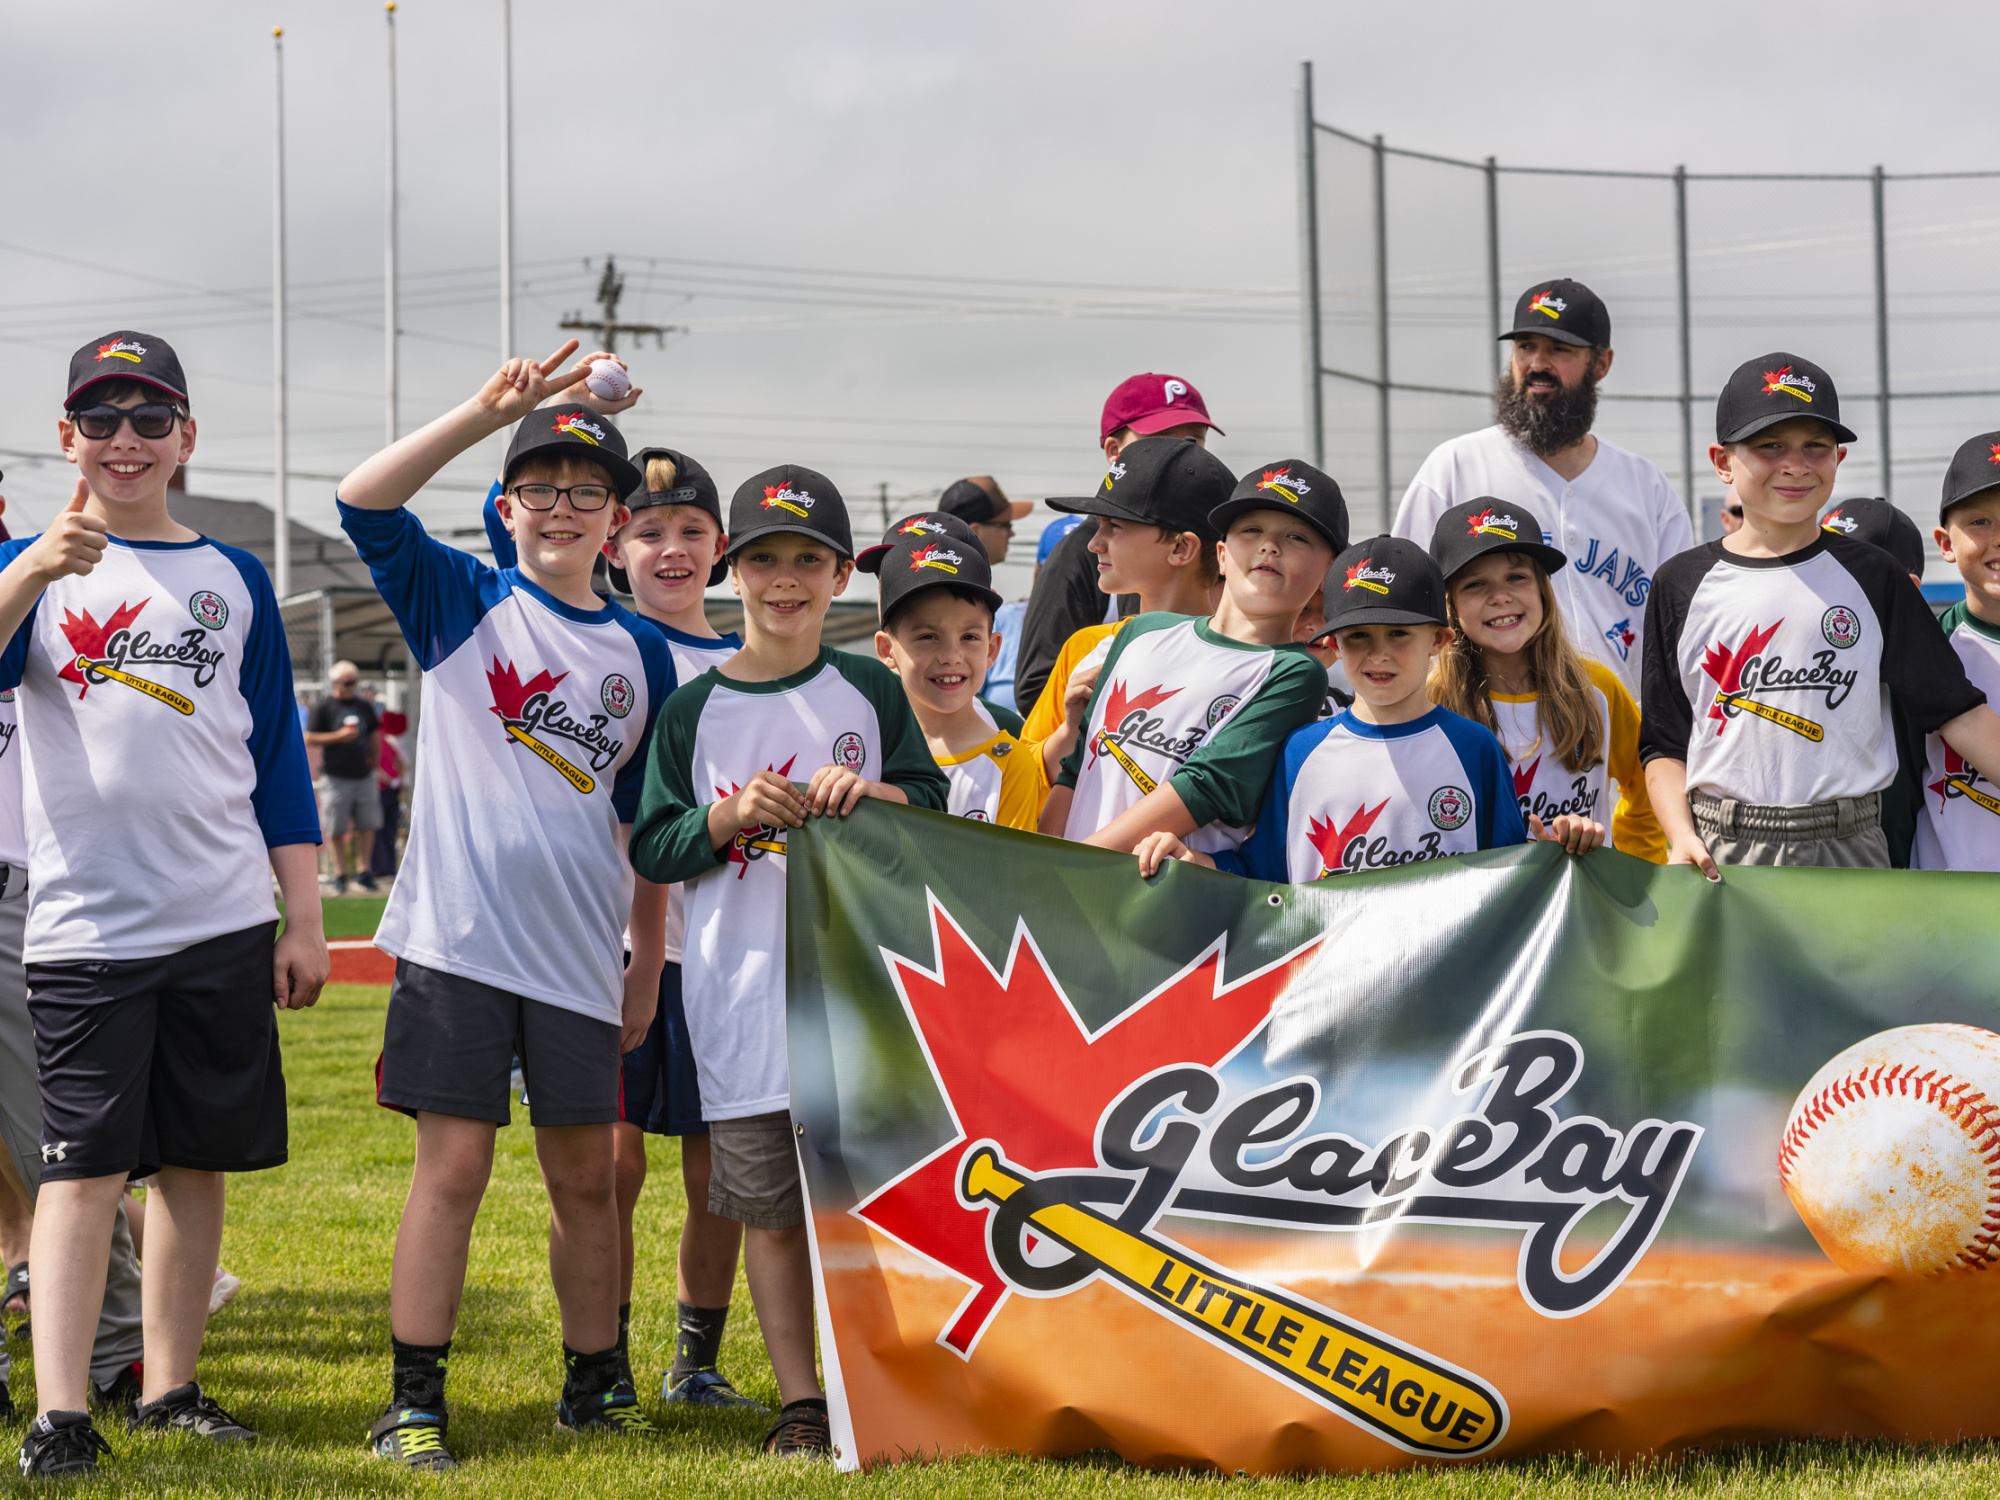 Photo of children wearing ball caps and Glace Bay team uniforms and holding banner that says Glace Bay Little League